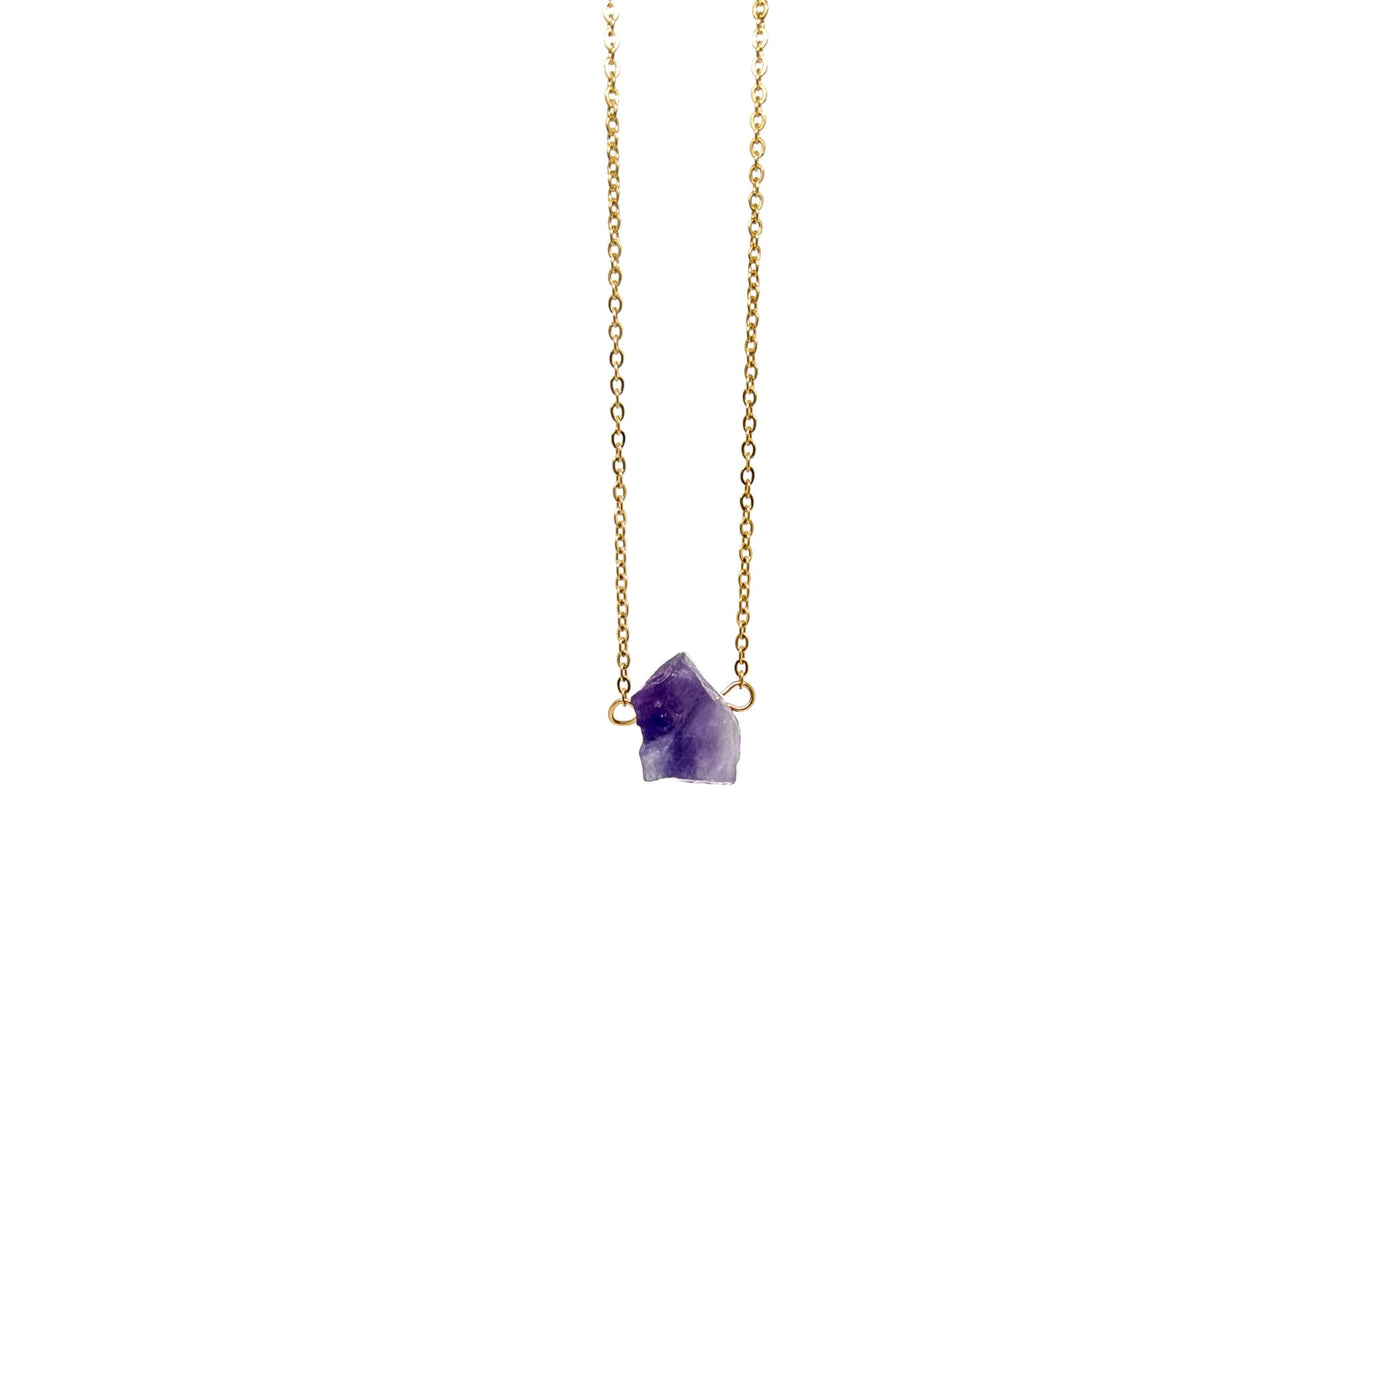 The Natural Amethyst Necklace